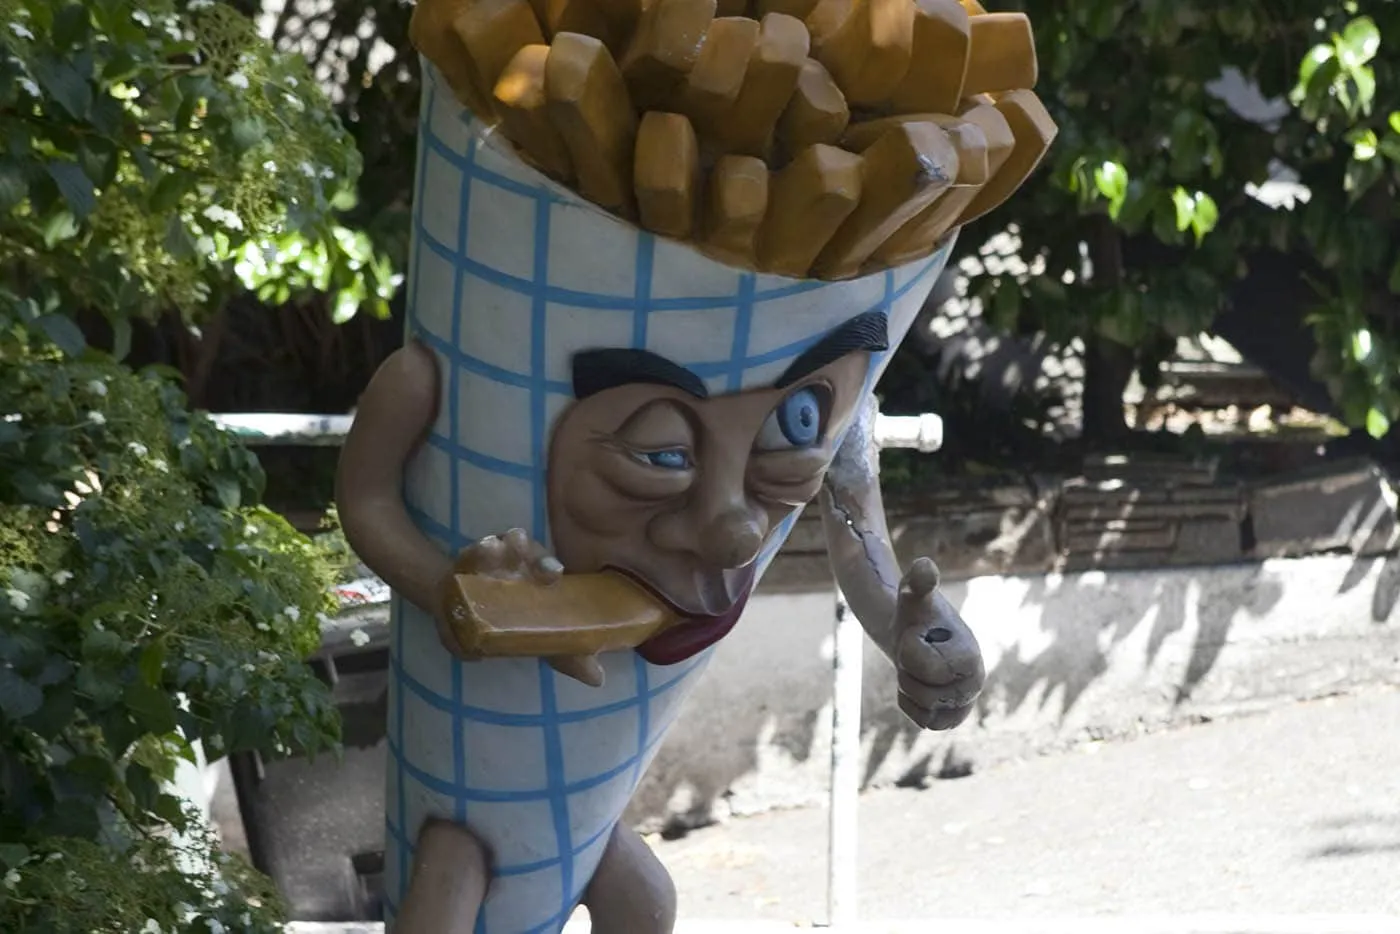 Deluxe Junk Fry Guy - Giant cone of french fries eating a french fry outside of Deluxe Junk in Fremont, Seattle, Washington.